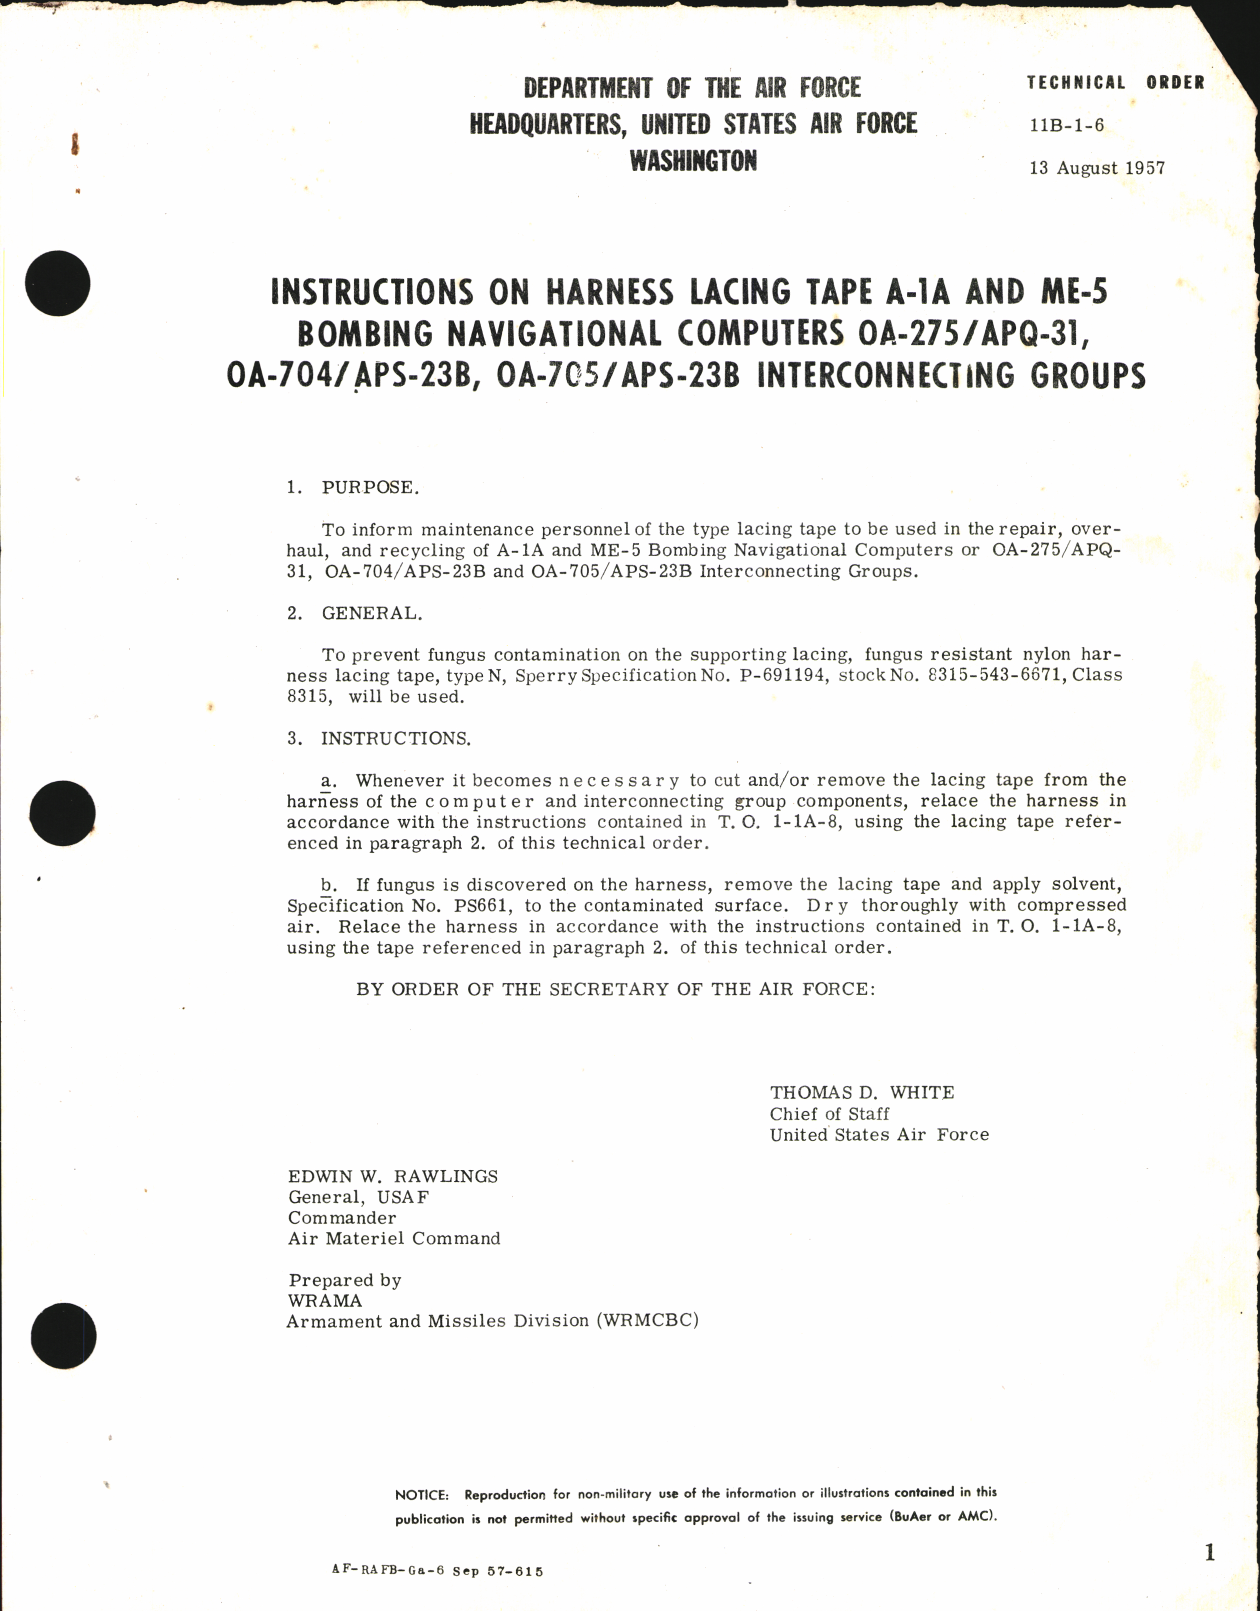 Sample page 1 from AirCorps Library document: Instructions on Harness Lacing Tape A-1A and ME-5 Bombing Navigational Computers